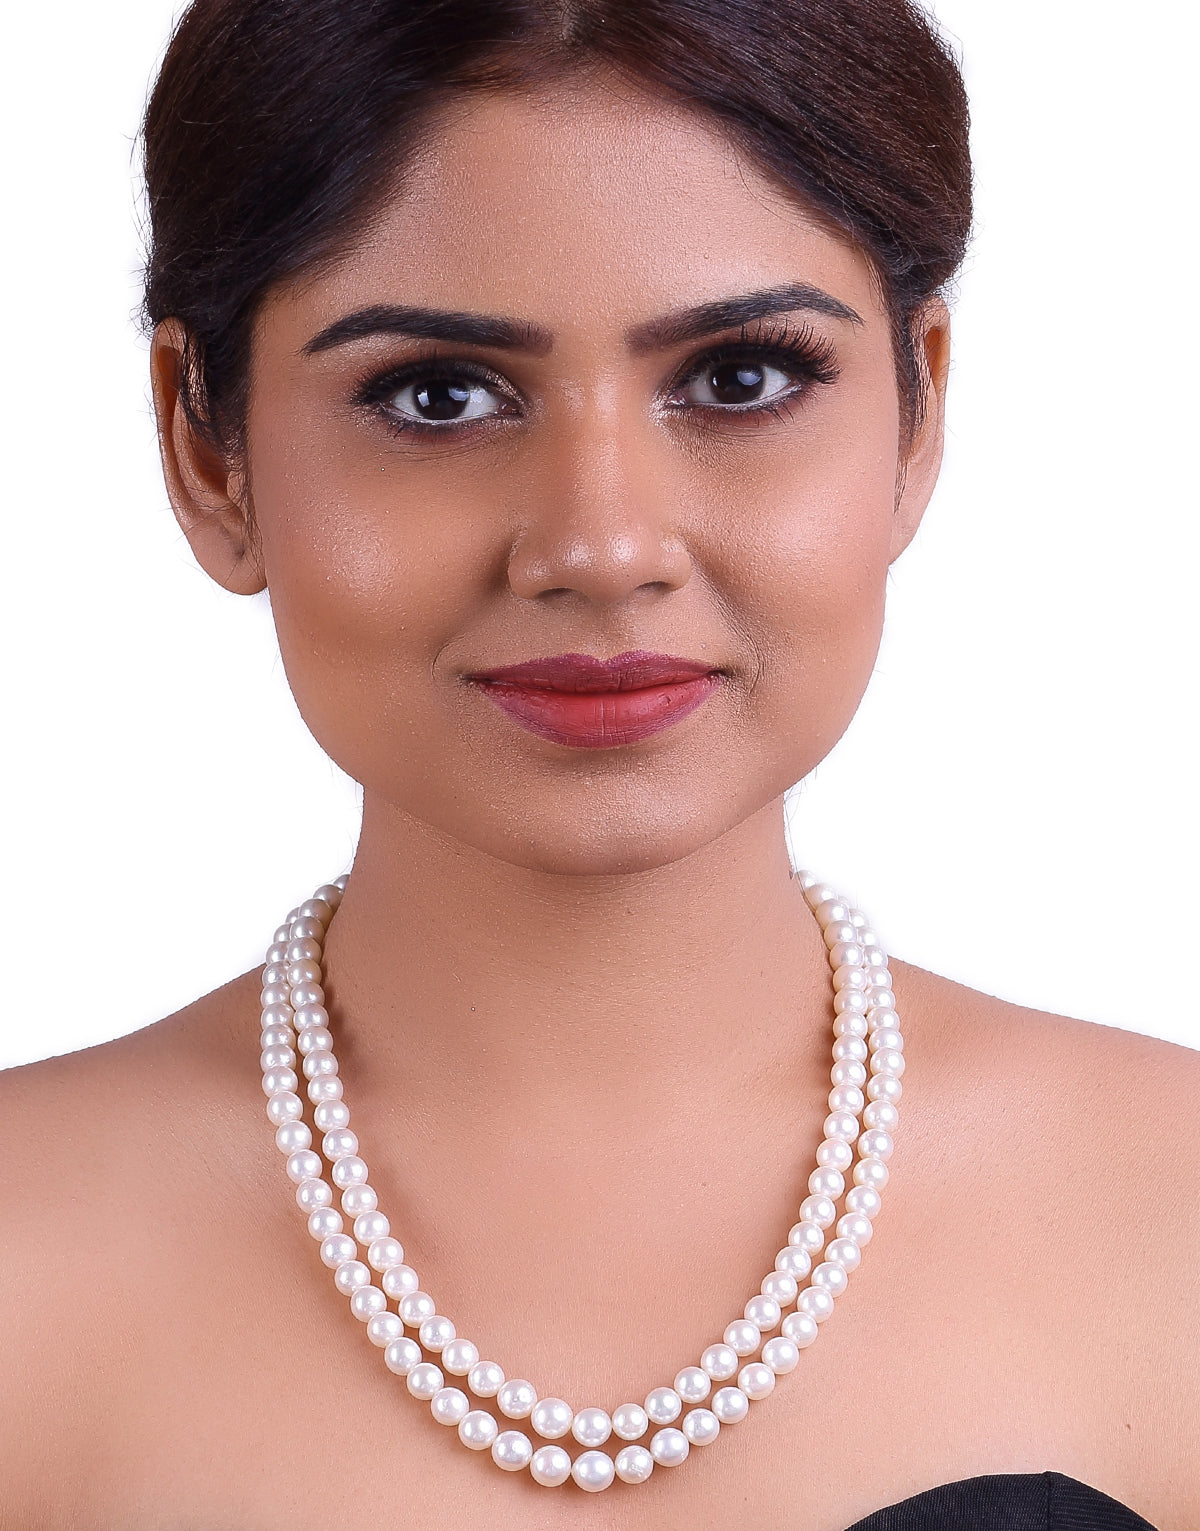 Amazon.com: South Sea Baroque Pearls Gold Necklace, 9-11mm Black And white Saltwater  Pearls With 14KT Solid Gold Clasp Necklace (16, 14K white gold) : Handmade  Products